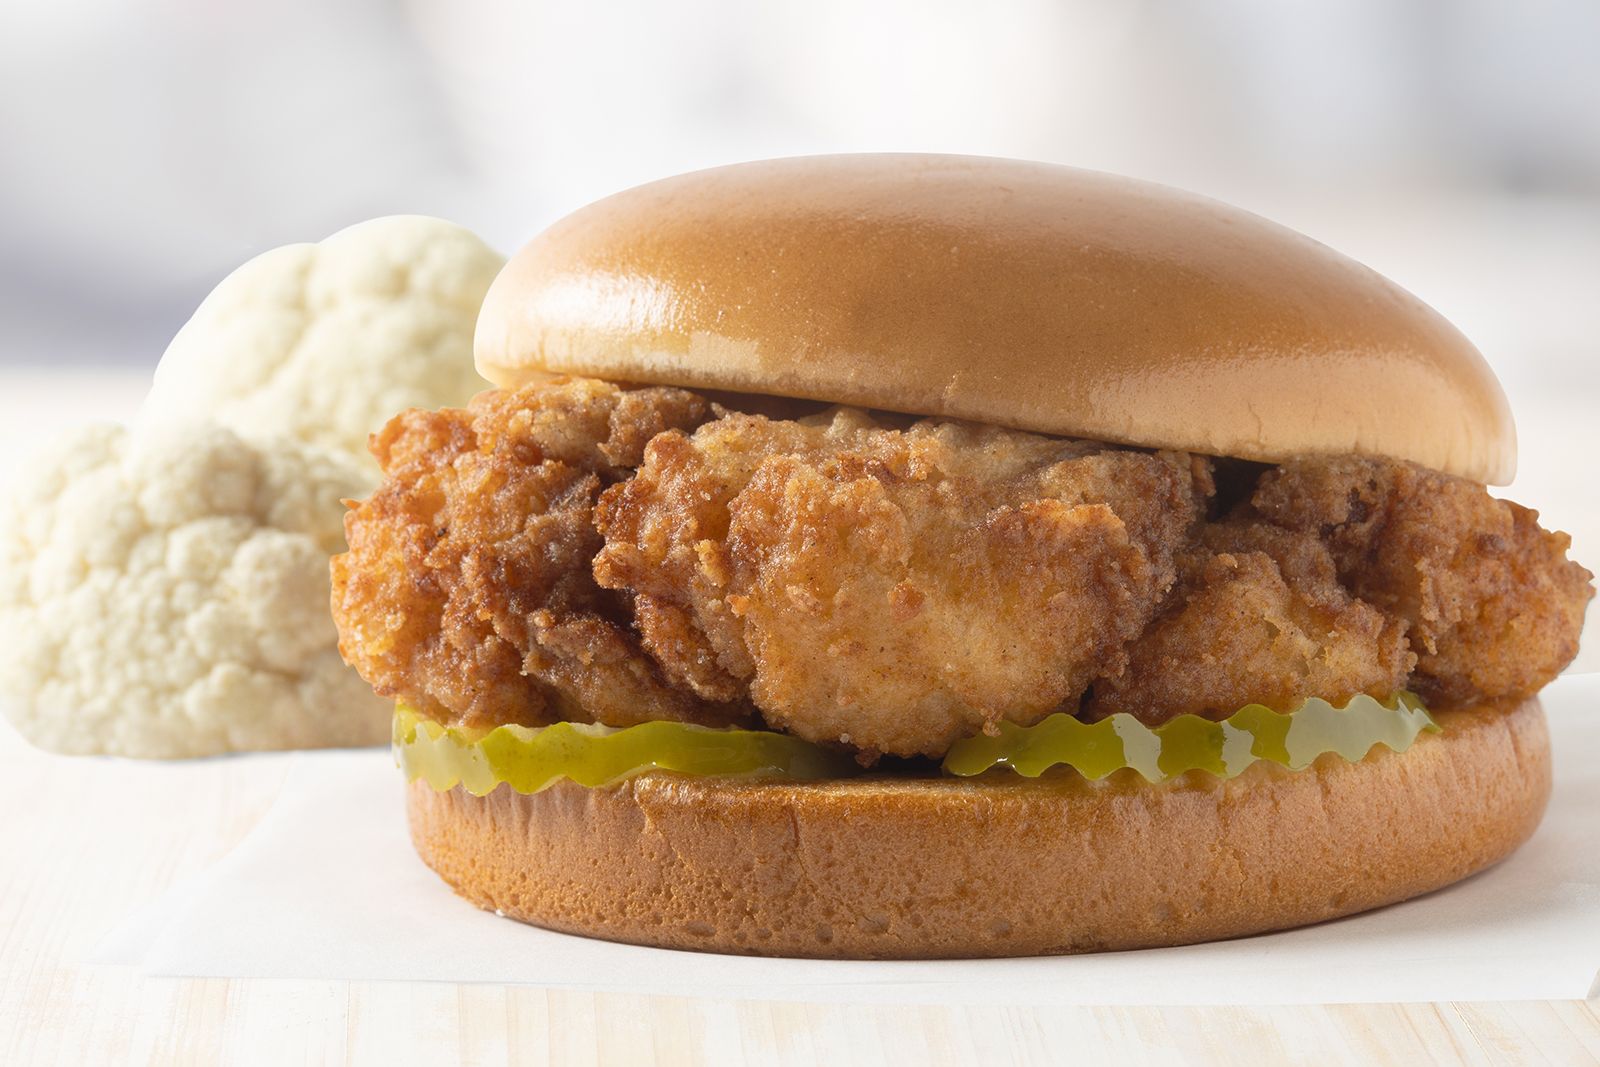 Chick-fil-A Welcomes Cauliflower to the Menu